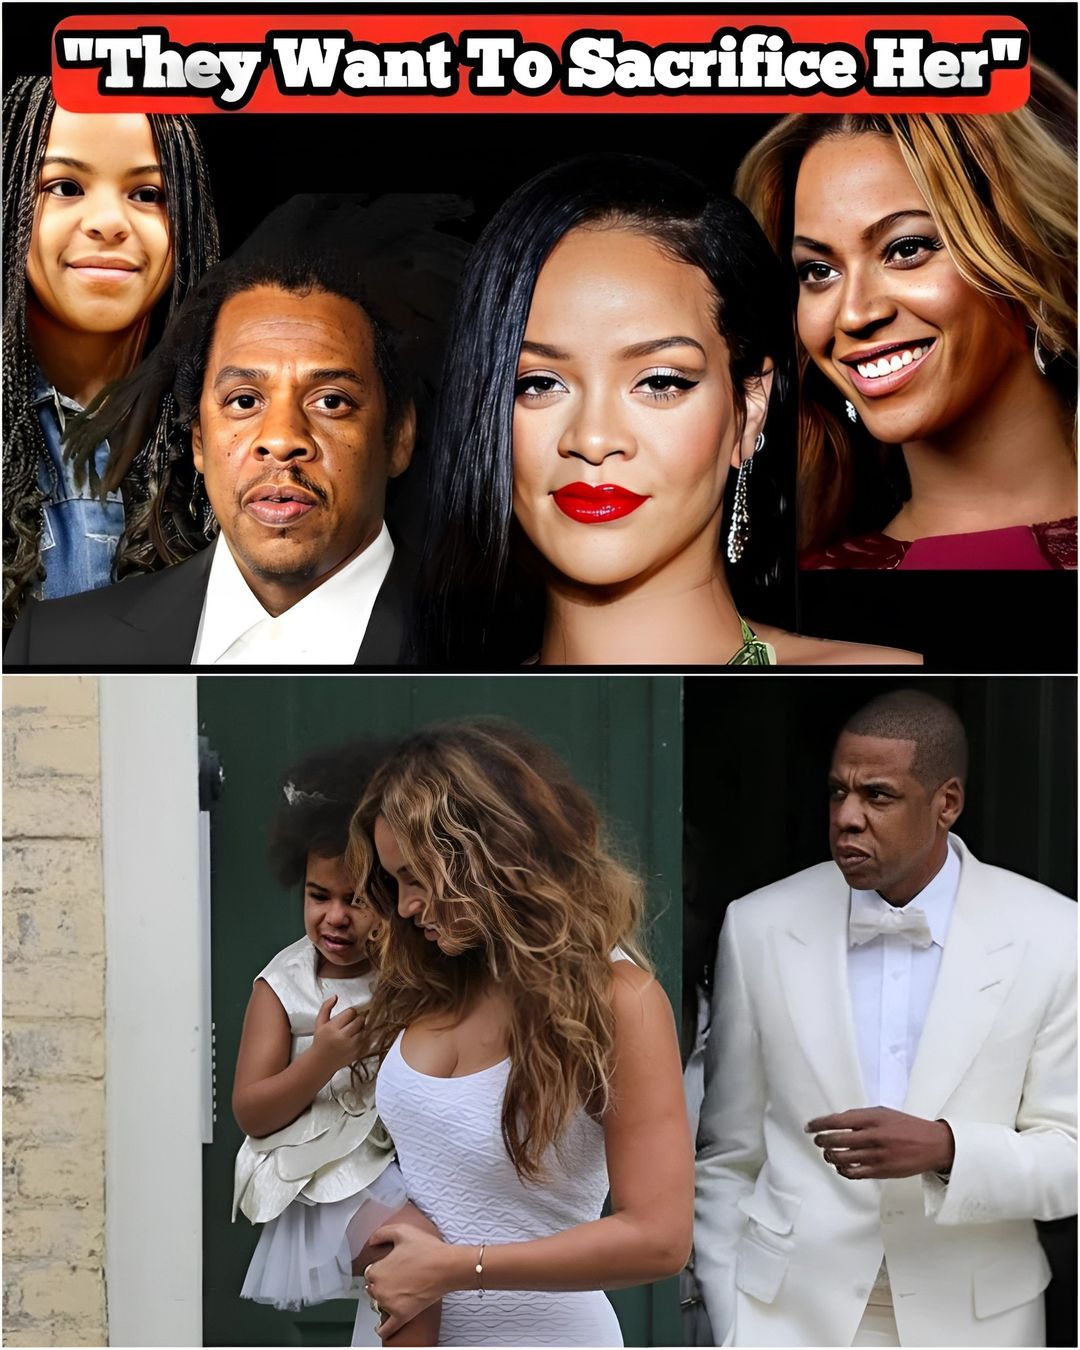 Wow that! Blue Ivy Accidentally Leaks Audio Of Jay-Z And Beyonce Discussing On Sacrificing Rihanna.